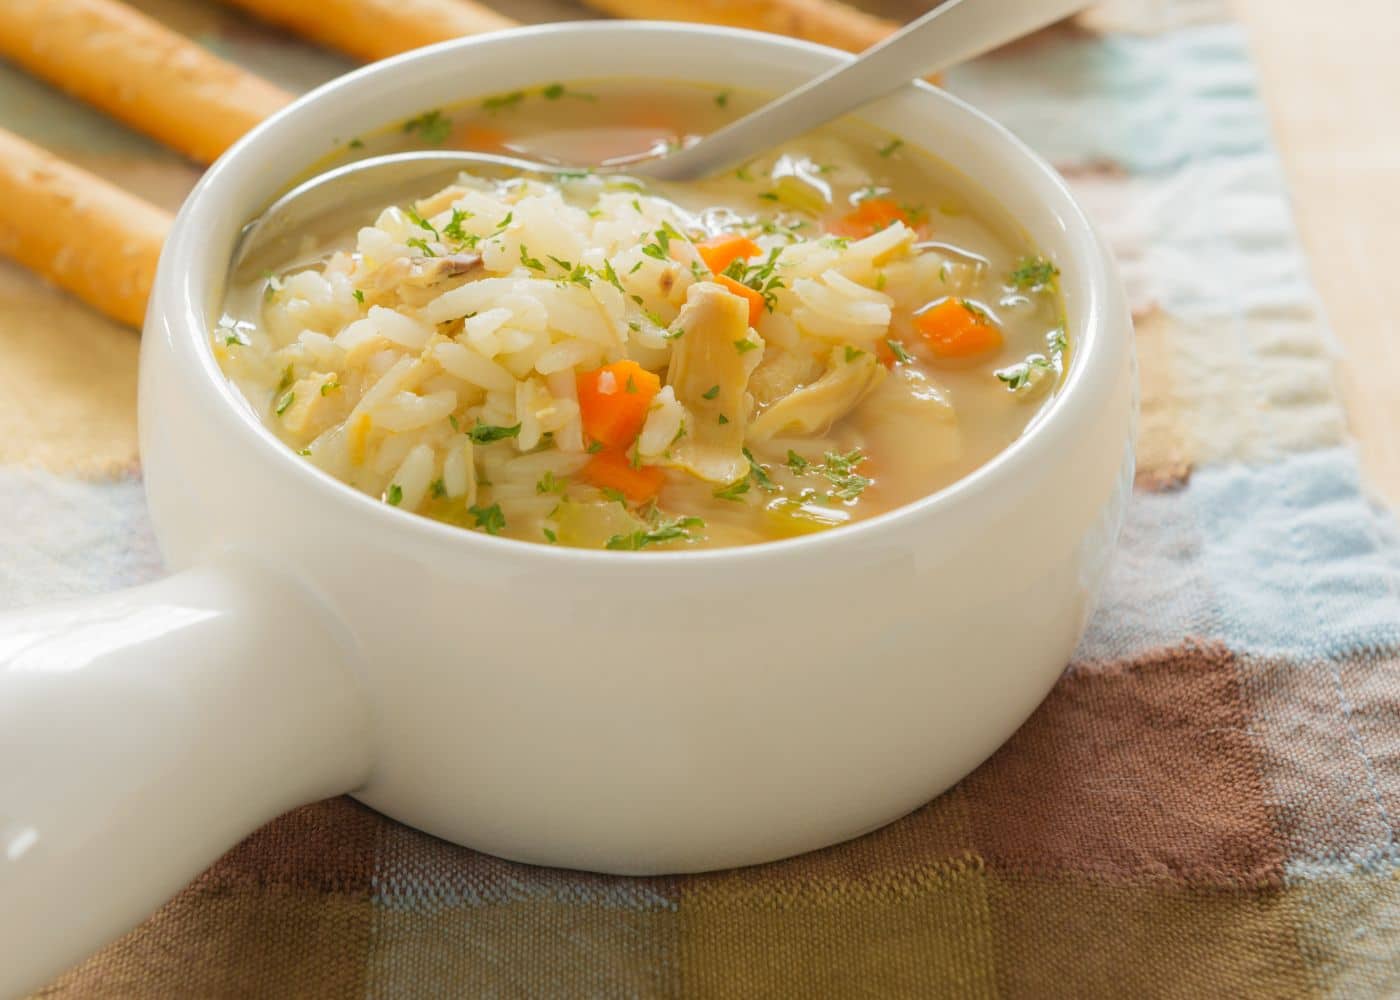 https://www.cleaneatingkitchen.com/wp-content/uploads/2021/11/bowl-of-instant-pot-chicken-rice-veggie-soup.jpg